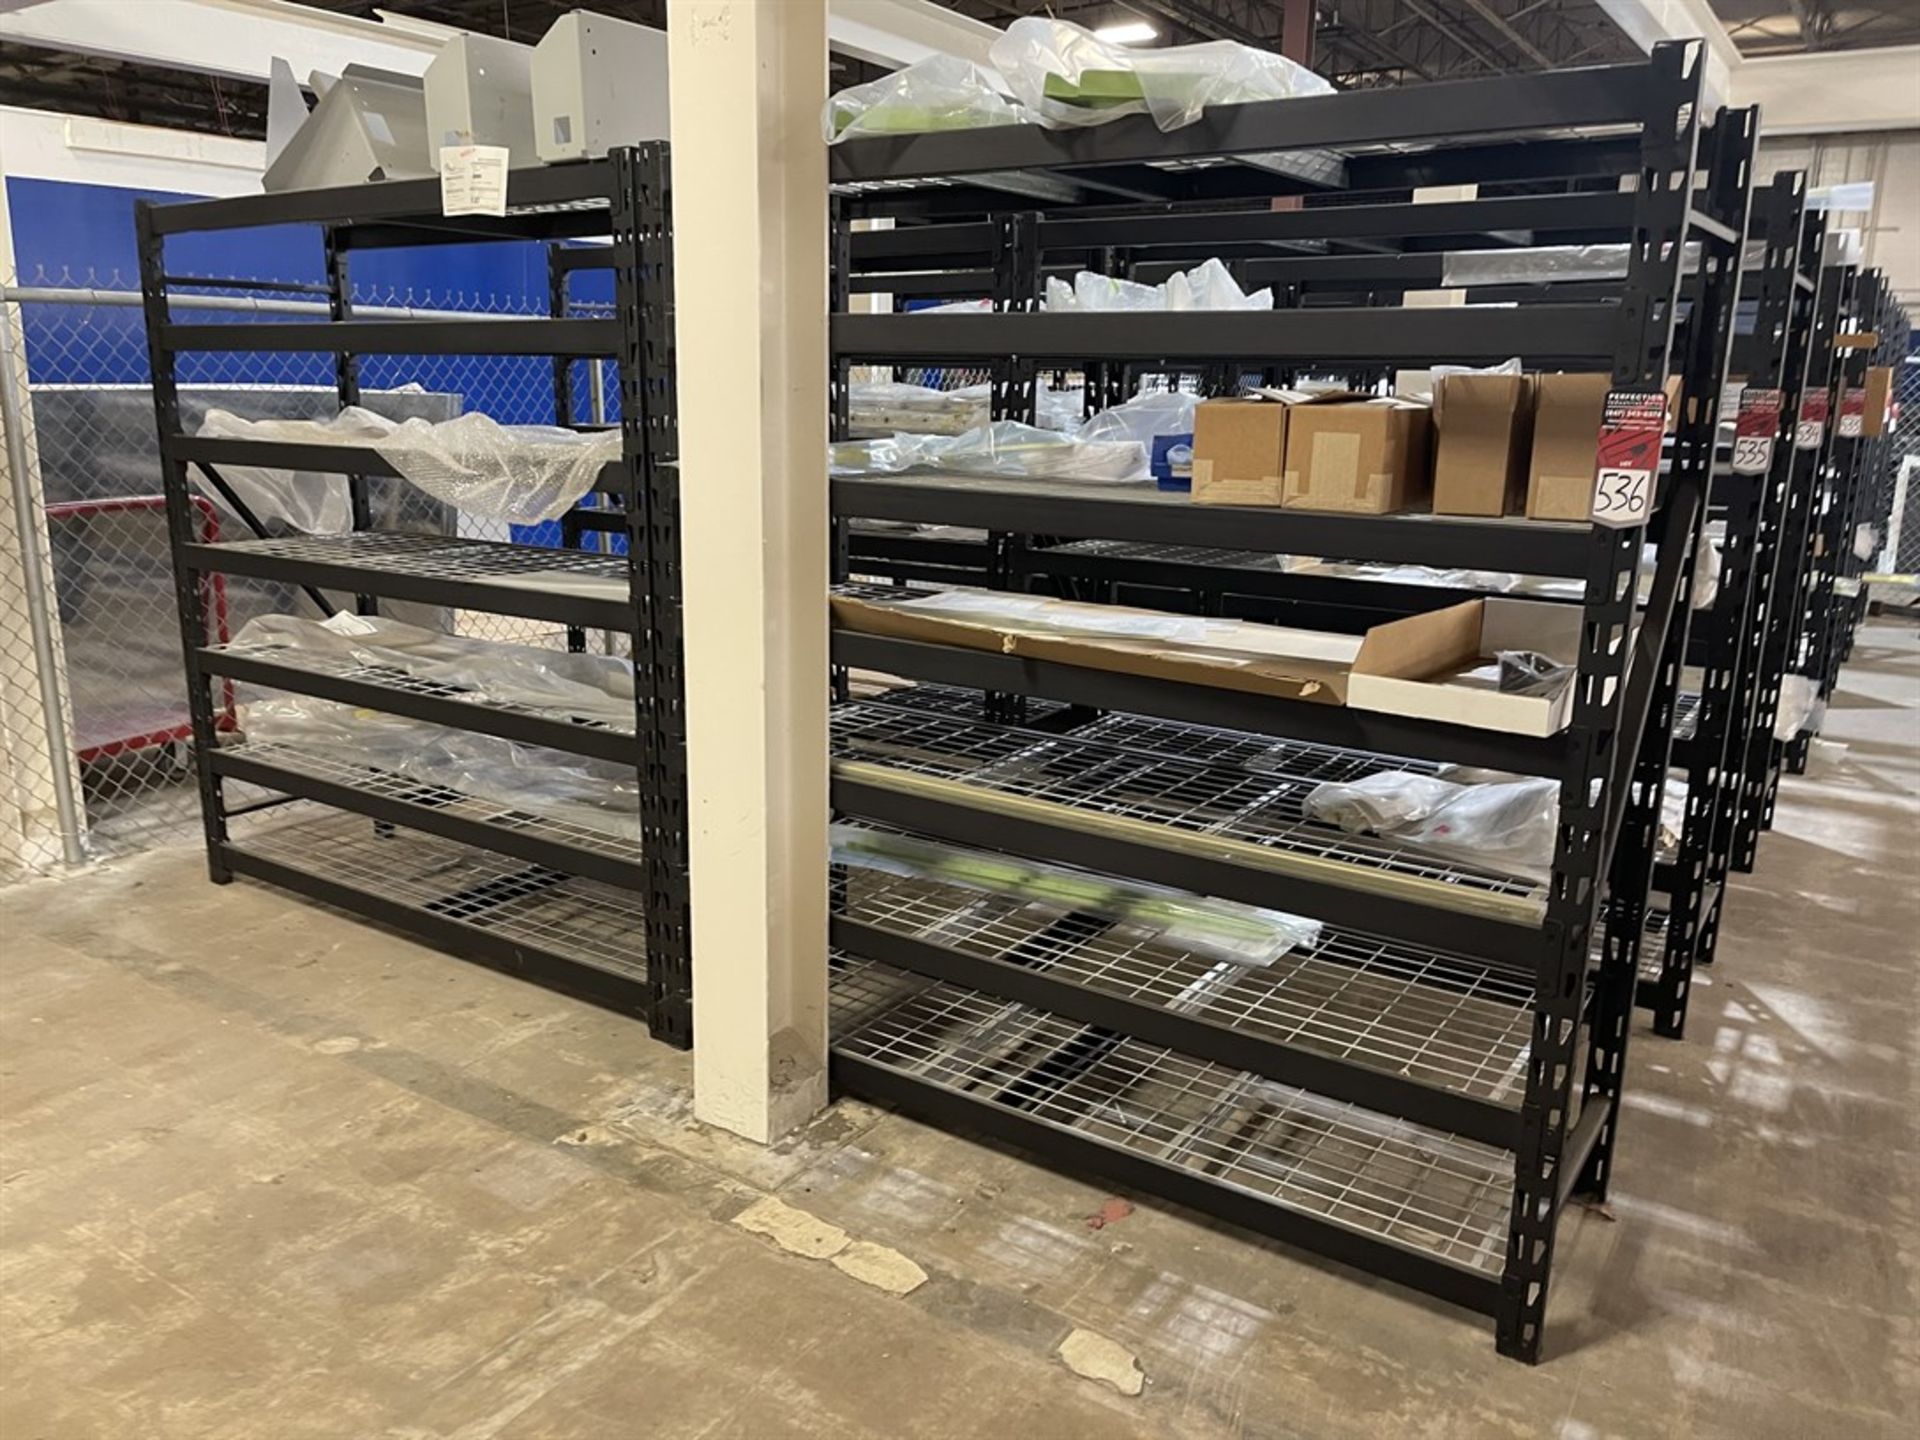 Lot of (2) Shop Shelving Units, 6'6"T x 6'W x 24" D Each Section, (Contents Not Included)